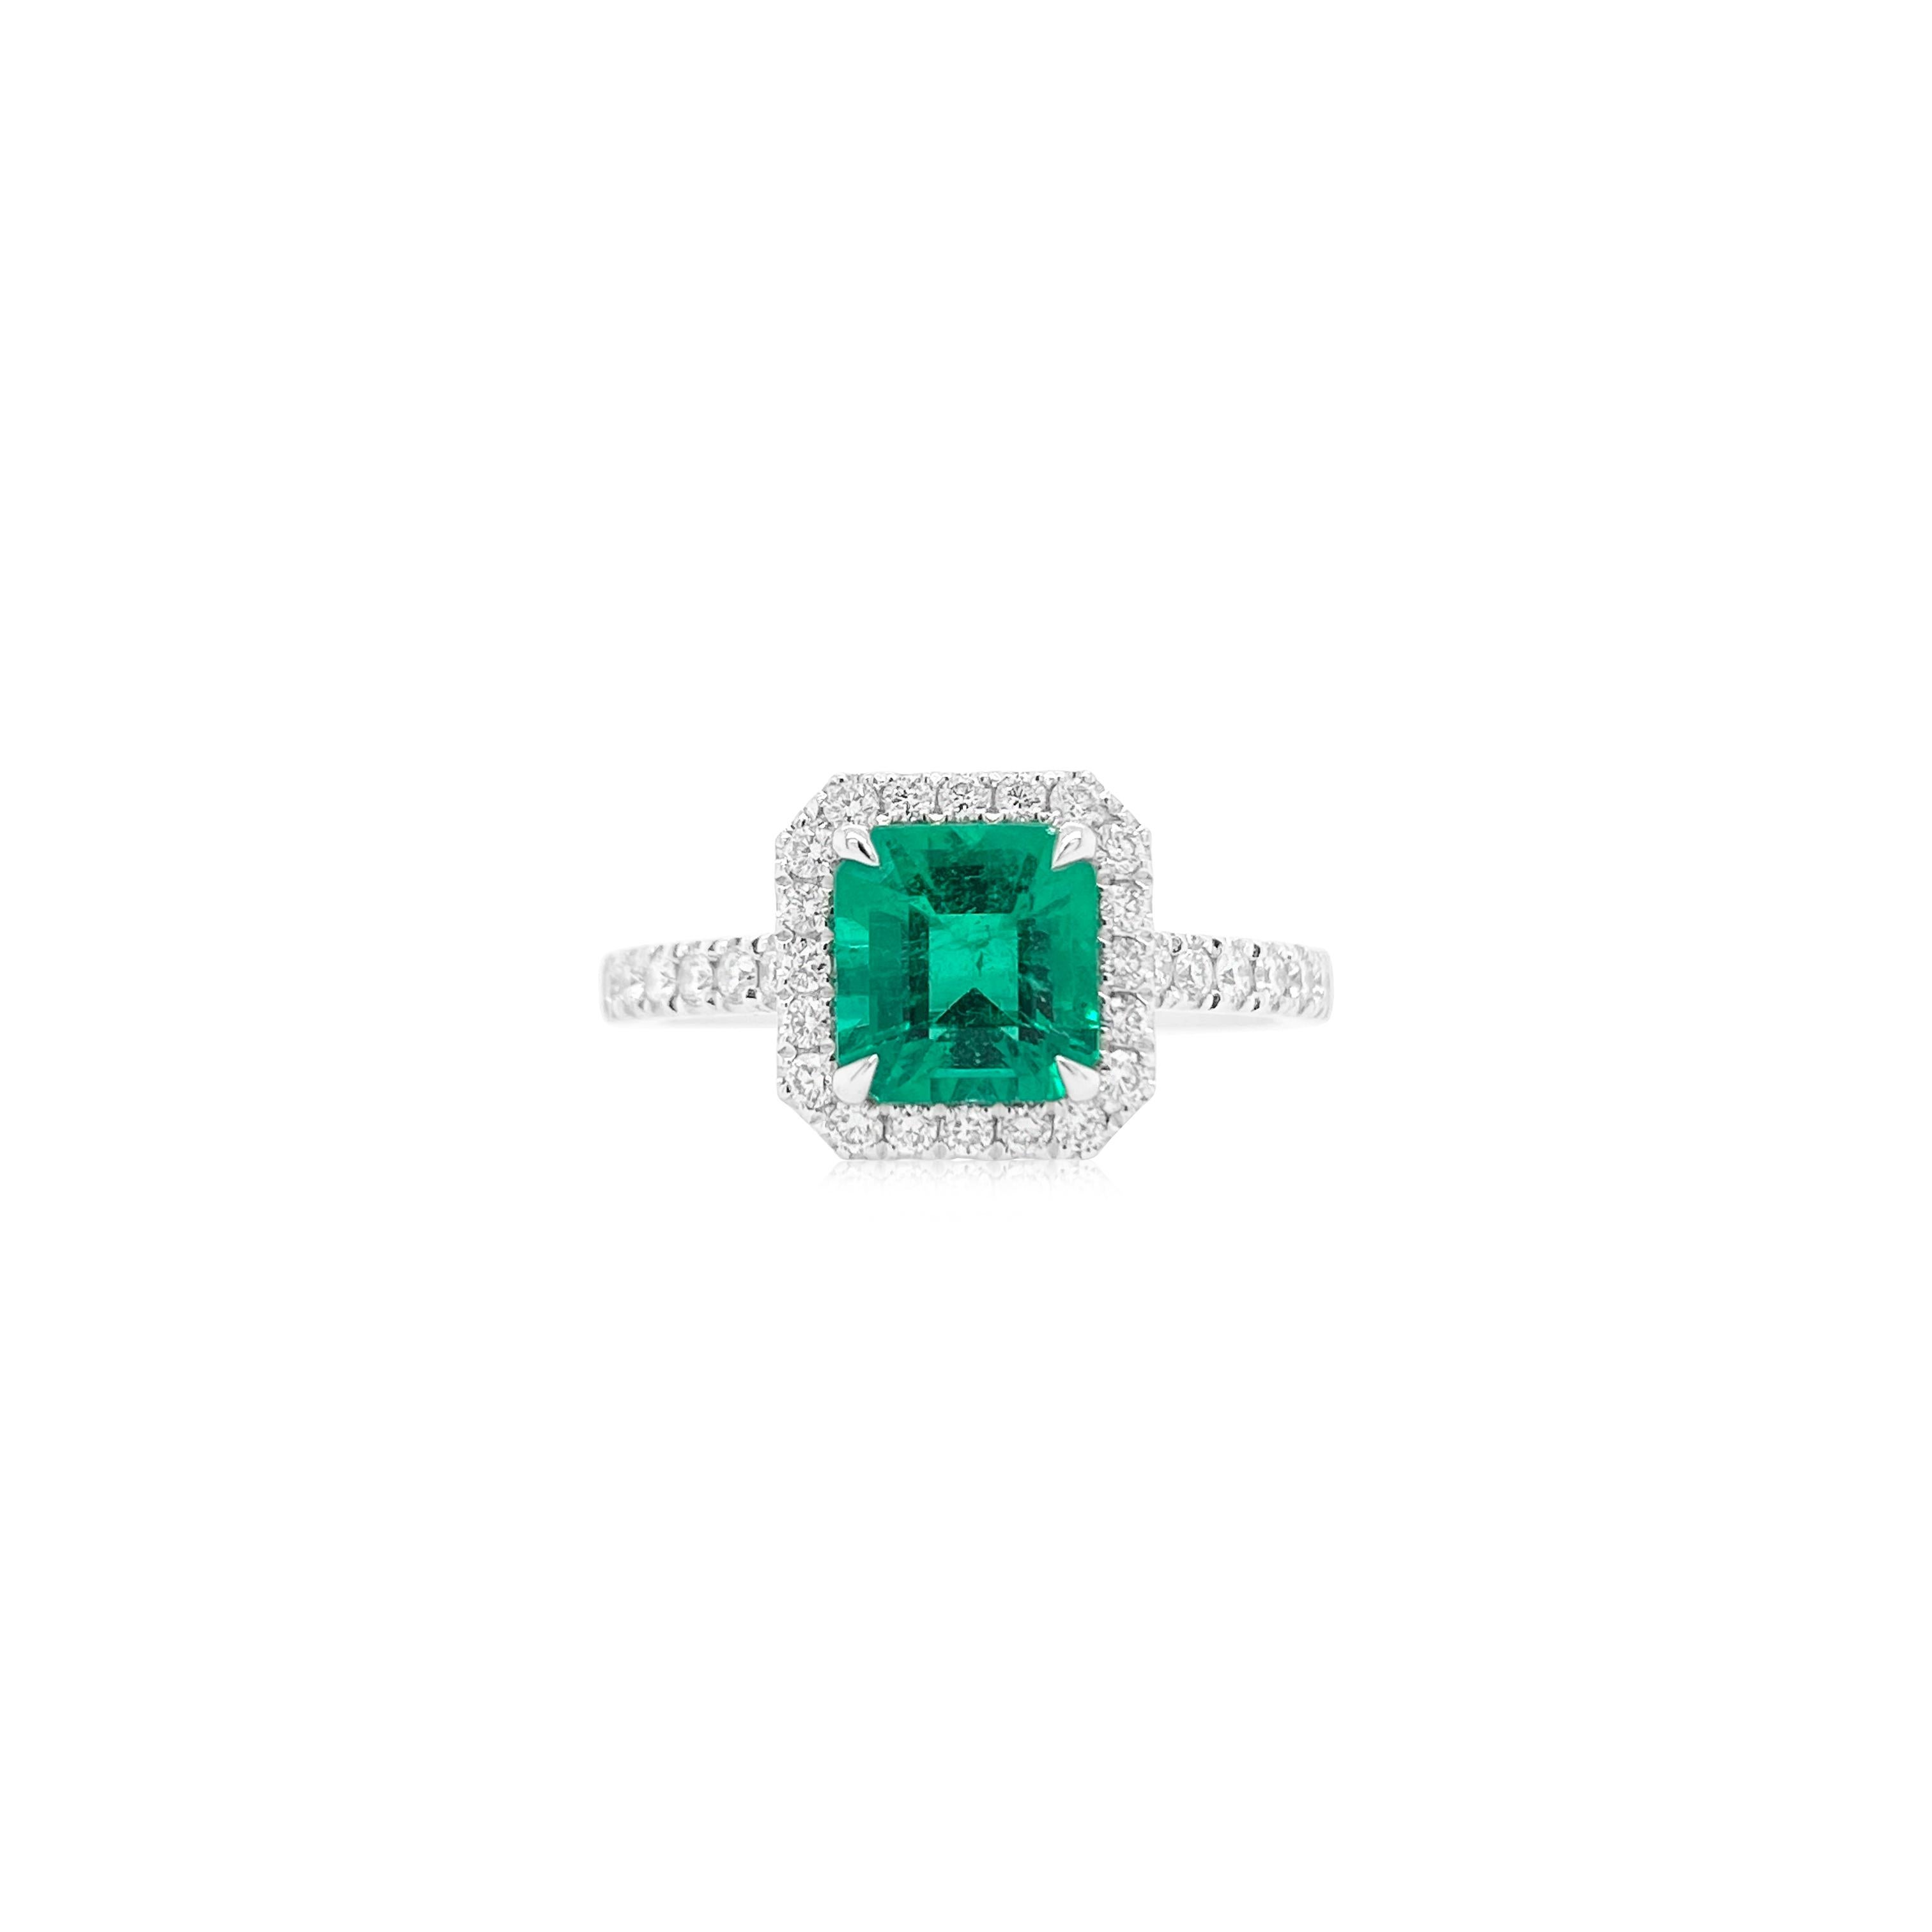 This vivid Green Colombian Emerald Ring is a true masterpiece with a rare center stone, with exceptional lustre and shine.

Natural Colombian Emerald - 1.24 cts
White Diamond - 0.33 cts
Comes with a CGL lab certificate 
Made in Platinum

HYT Jewelry